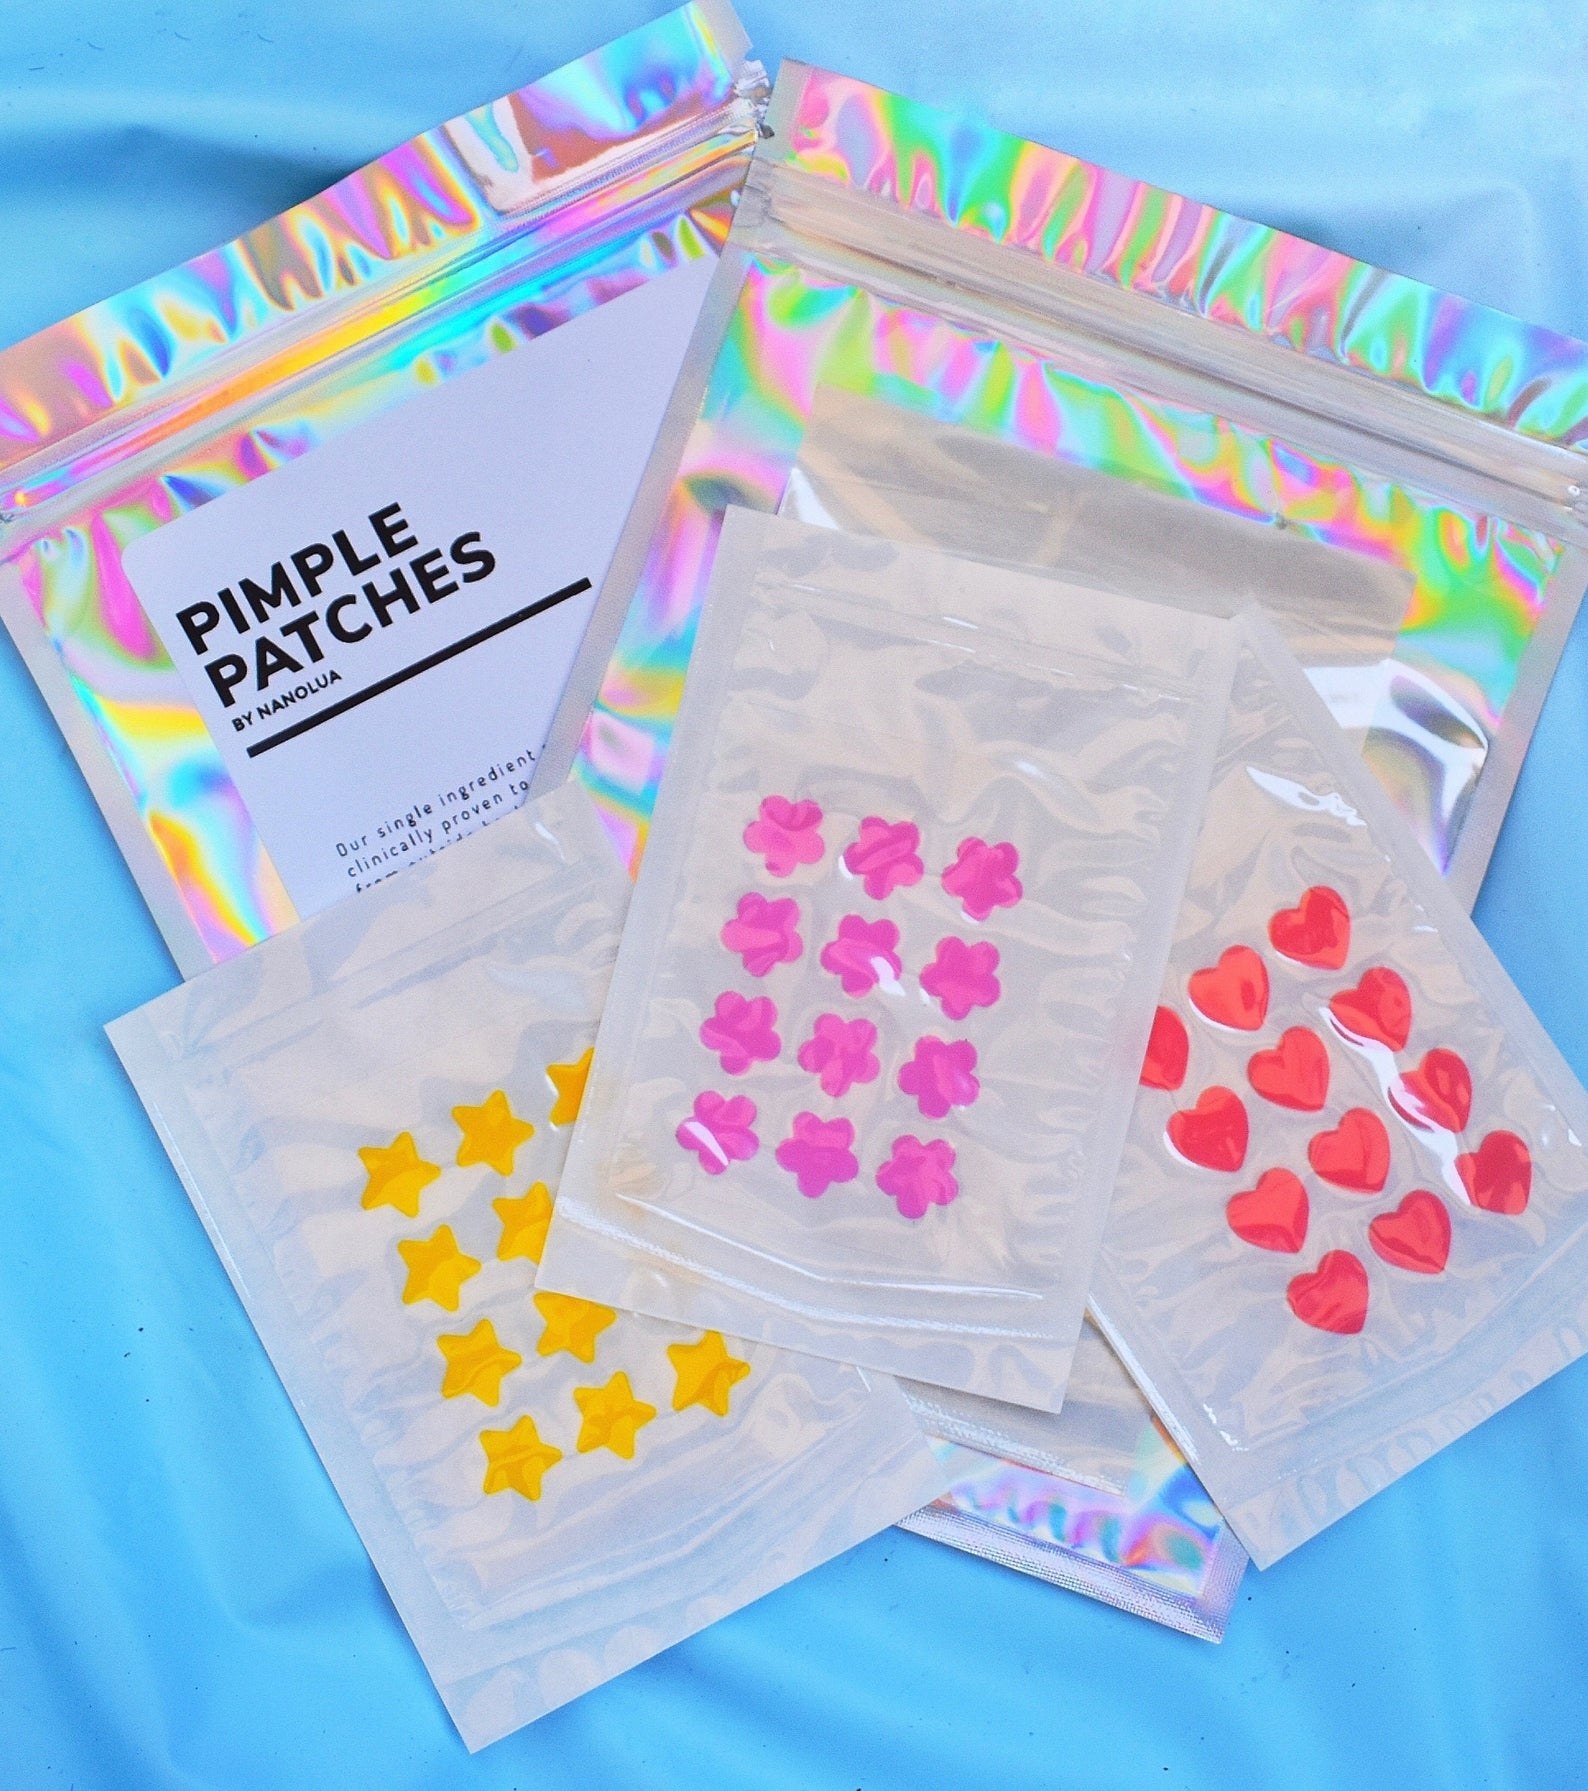 Pack of NanoLuaShop Pimple Patches in various shapes and colors